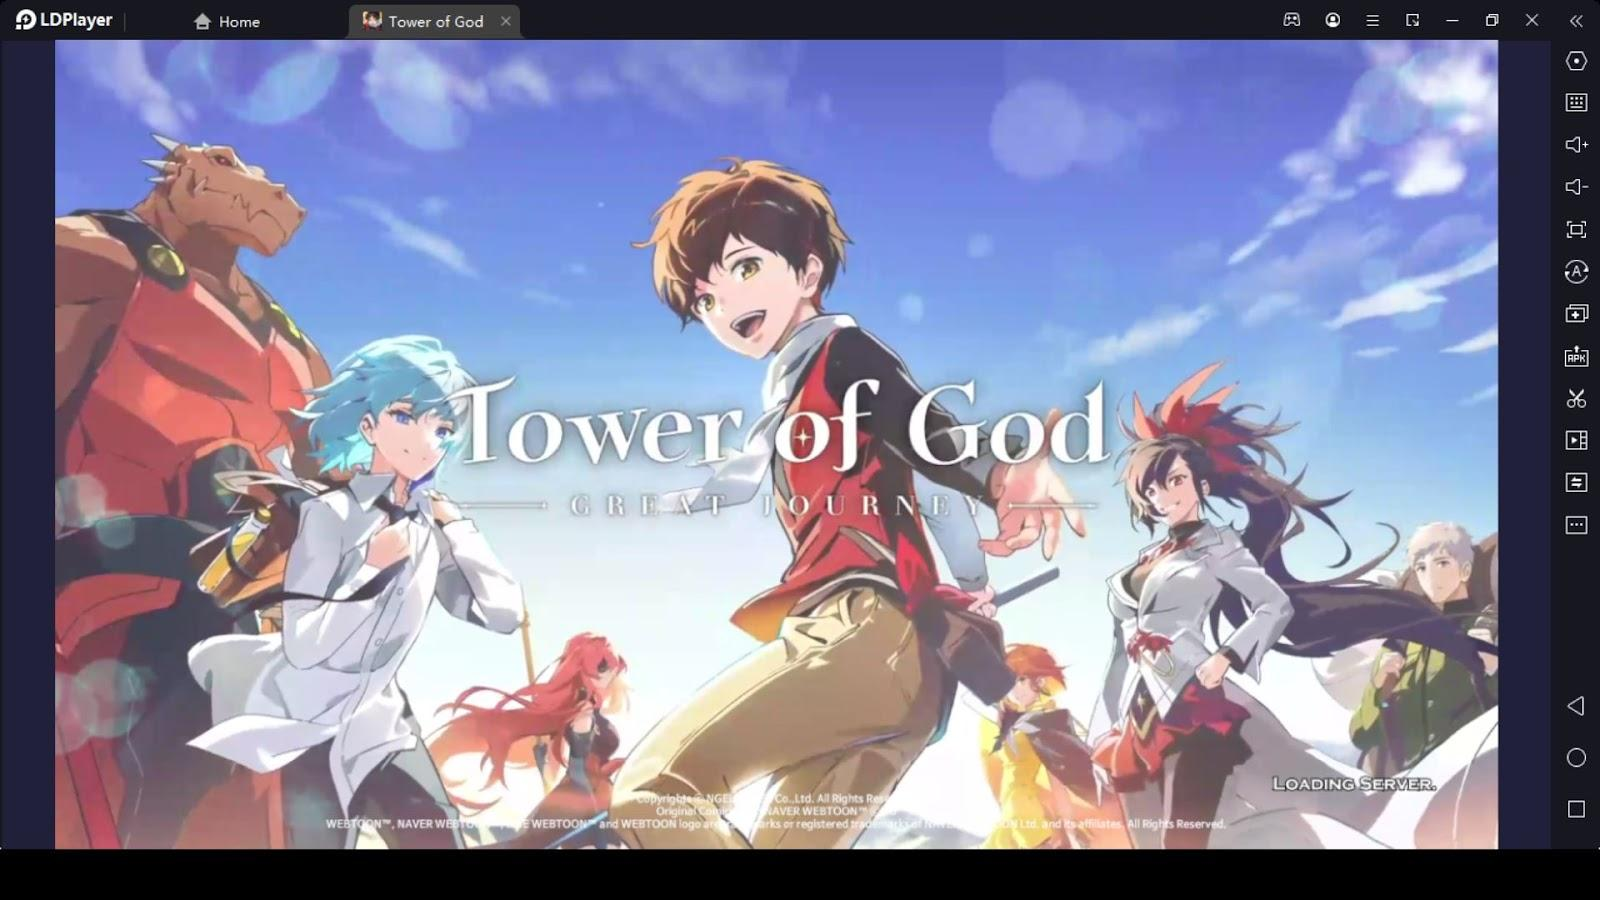 Tower of God's mobile game Tower of God M: The Great Journey